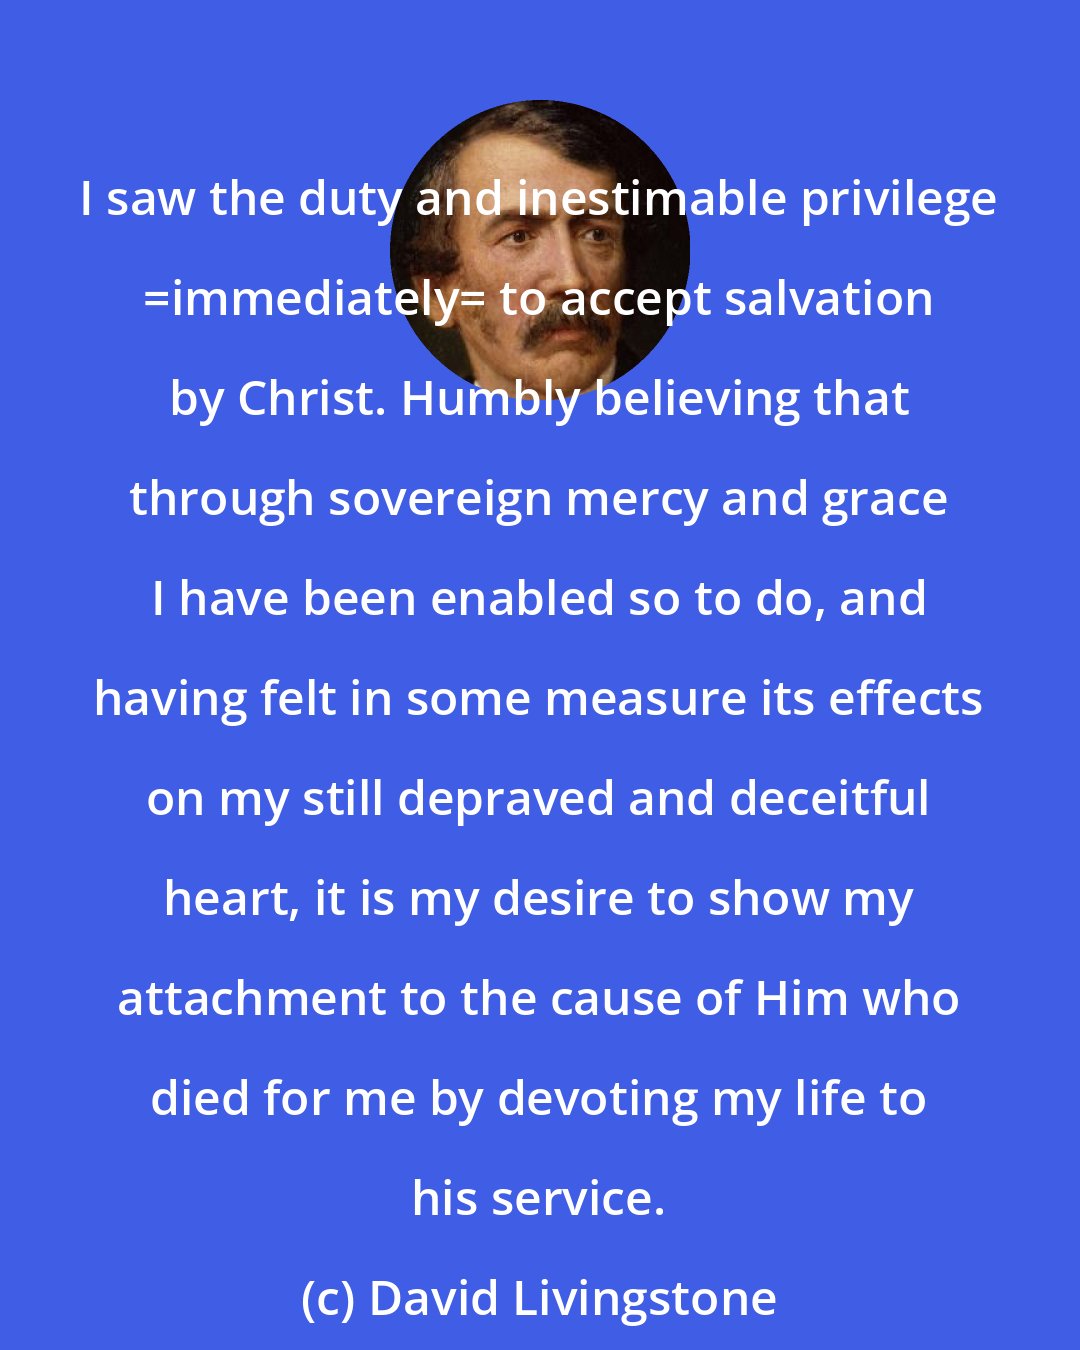 David Livingstone: I saw the duty and inestimable privilege _immediately_ to accept salvation by Christ. Humbly believing that through sovereign mercy and grace I have been enabled so to do, and having felt in some measure its effects on my still depraved and deceitful heart, it is my desire to show my attachment to the cause of Him who died for me by devoting my life to his service.